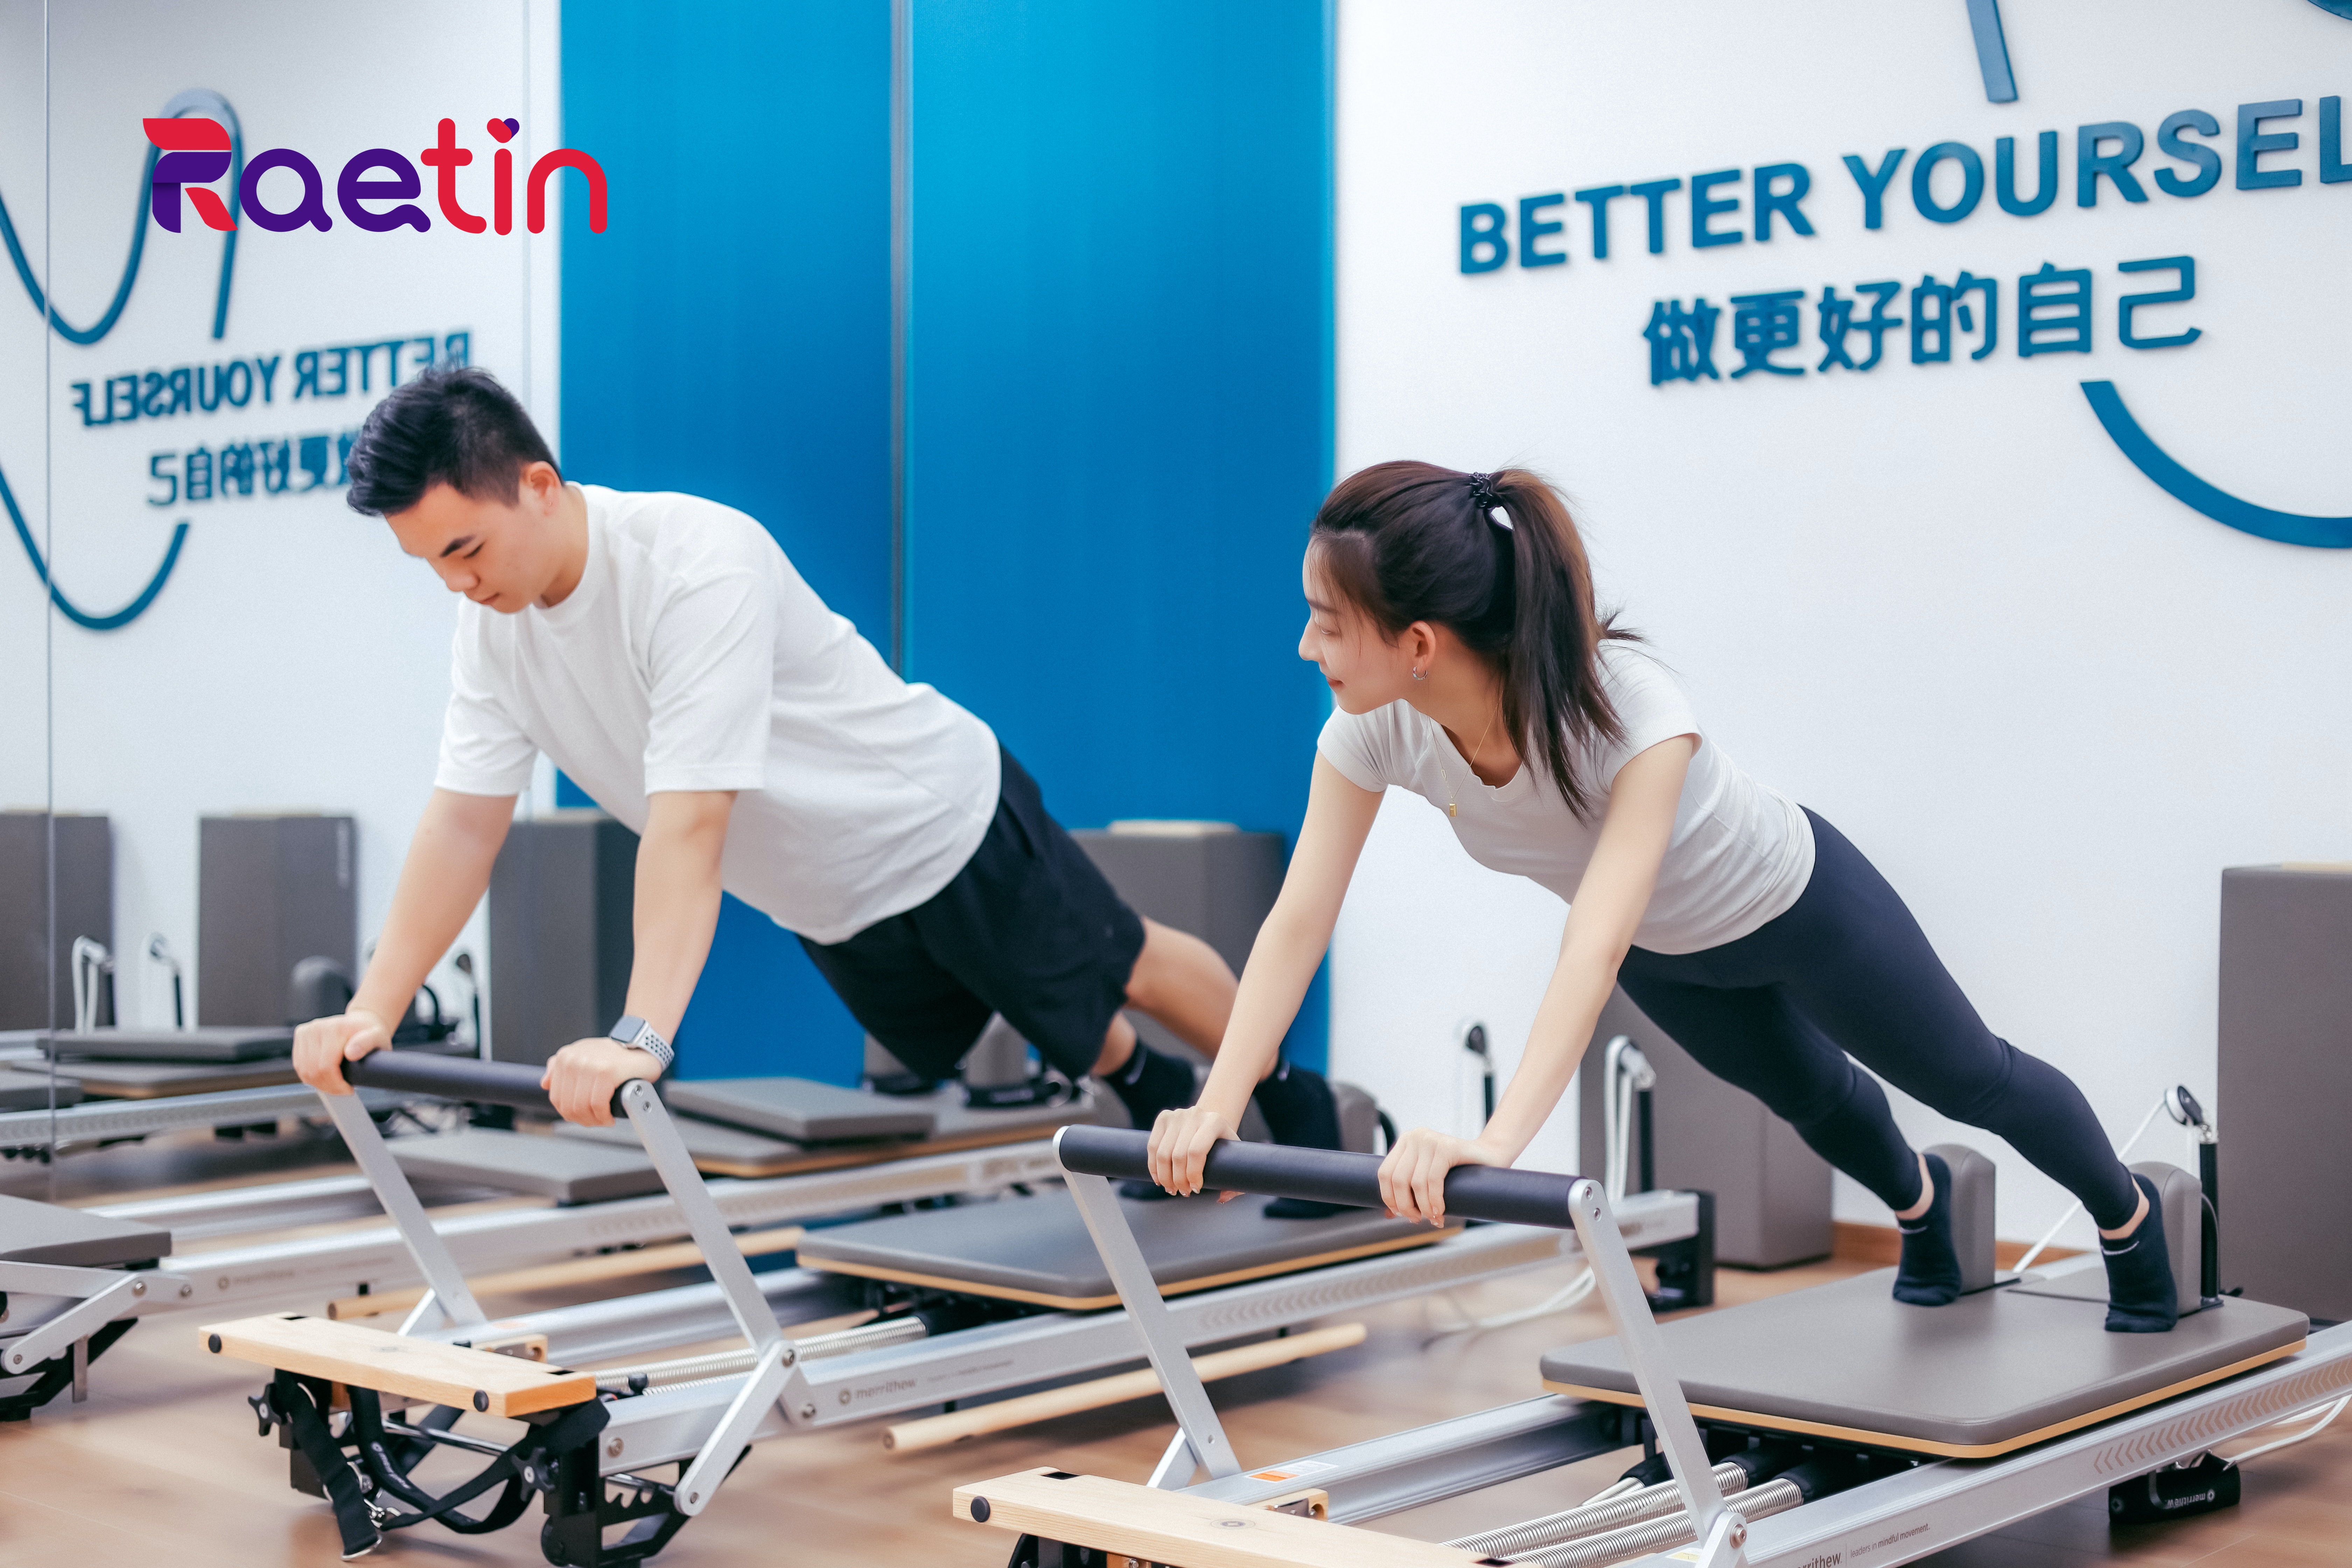 Do you have any customer reviews for the smart Pilates equipment you mentioned?